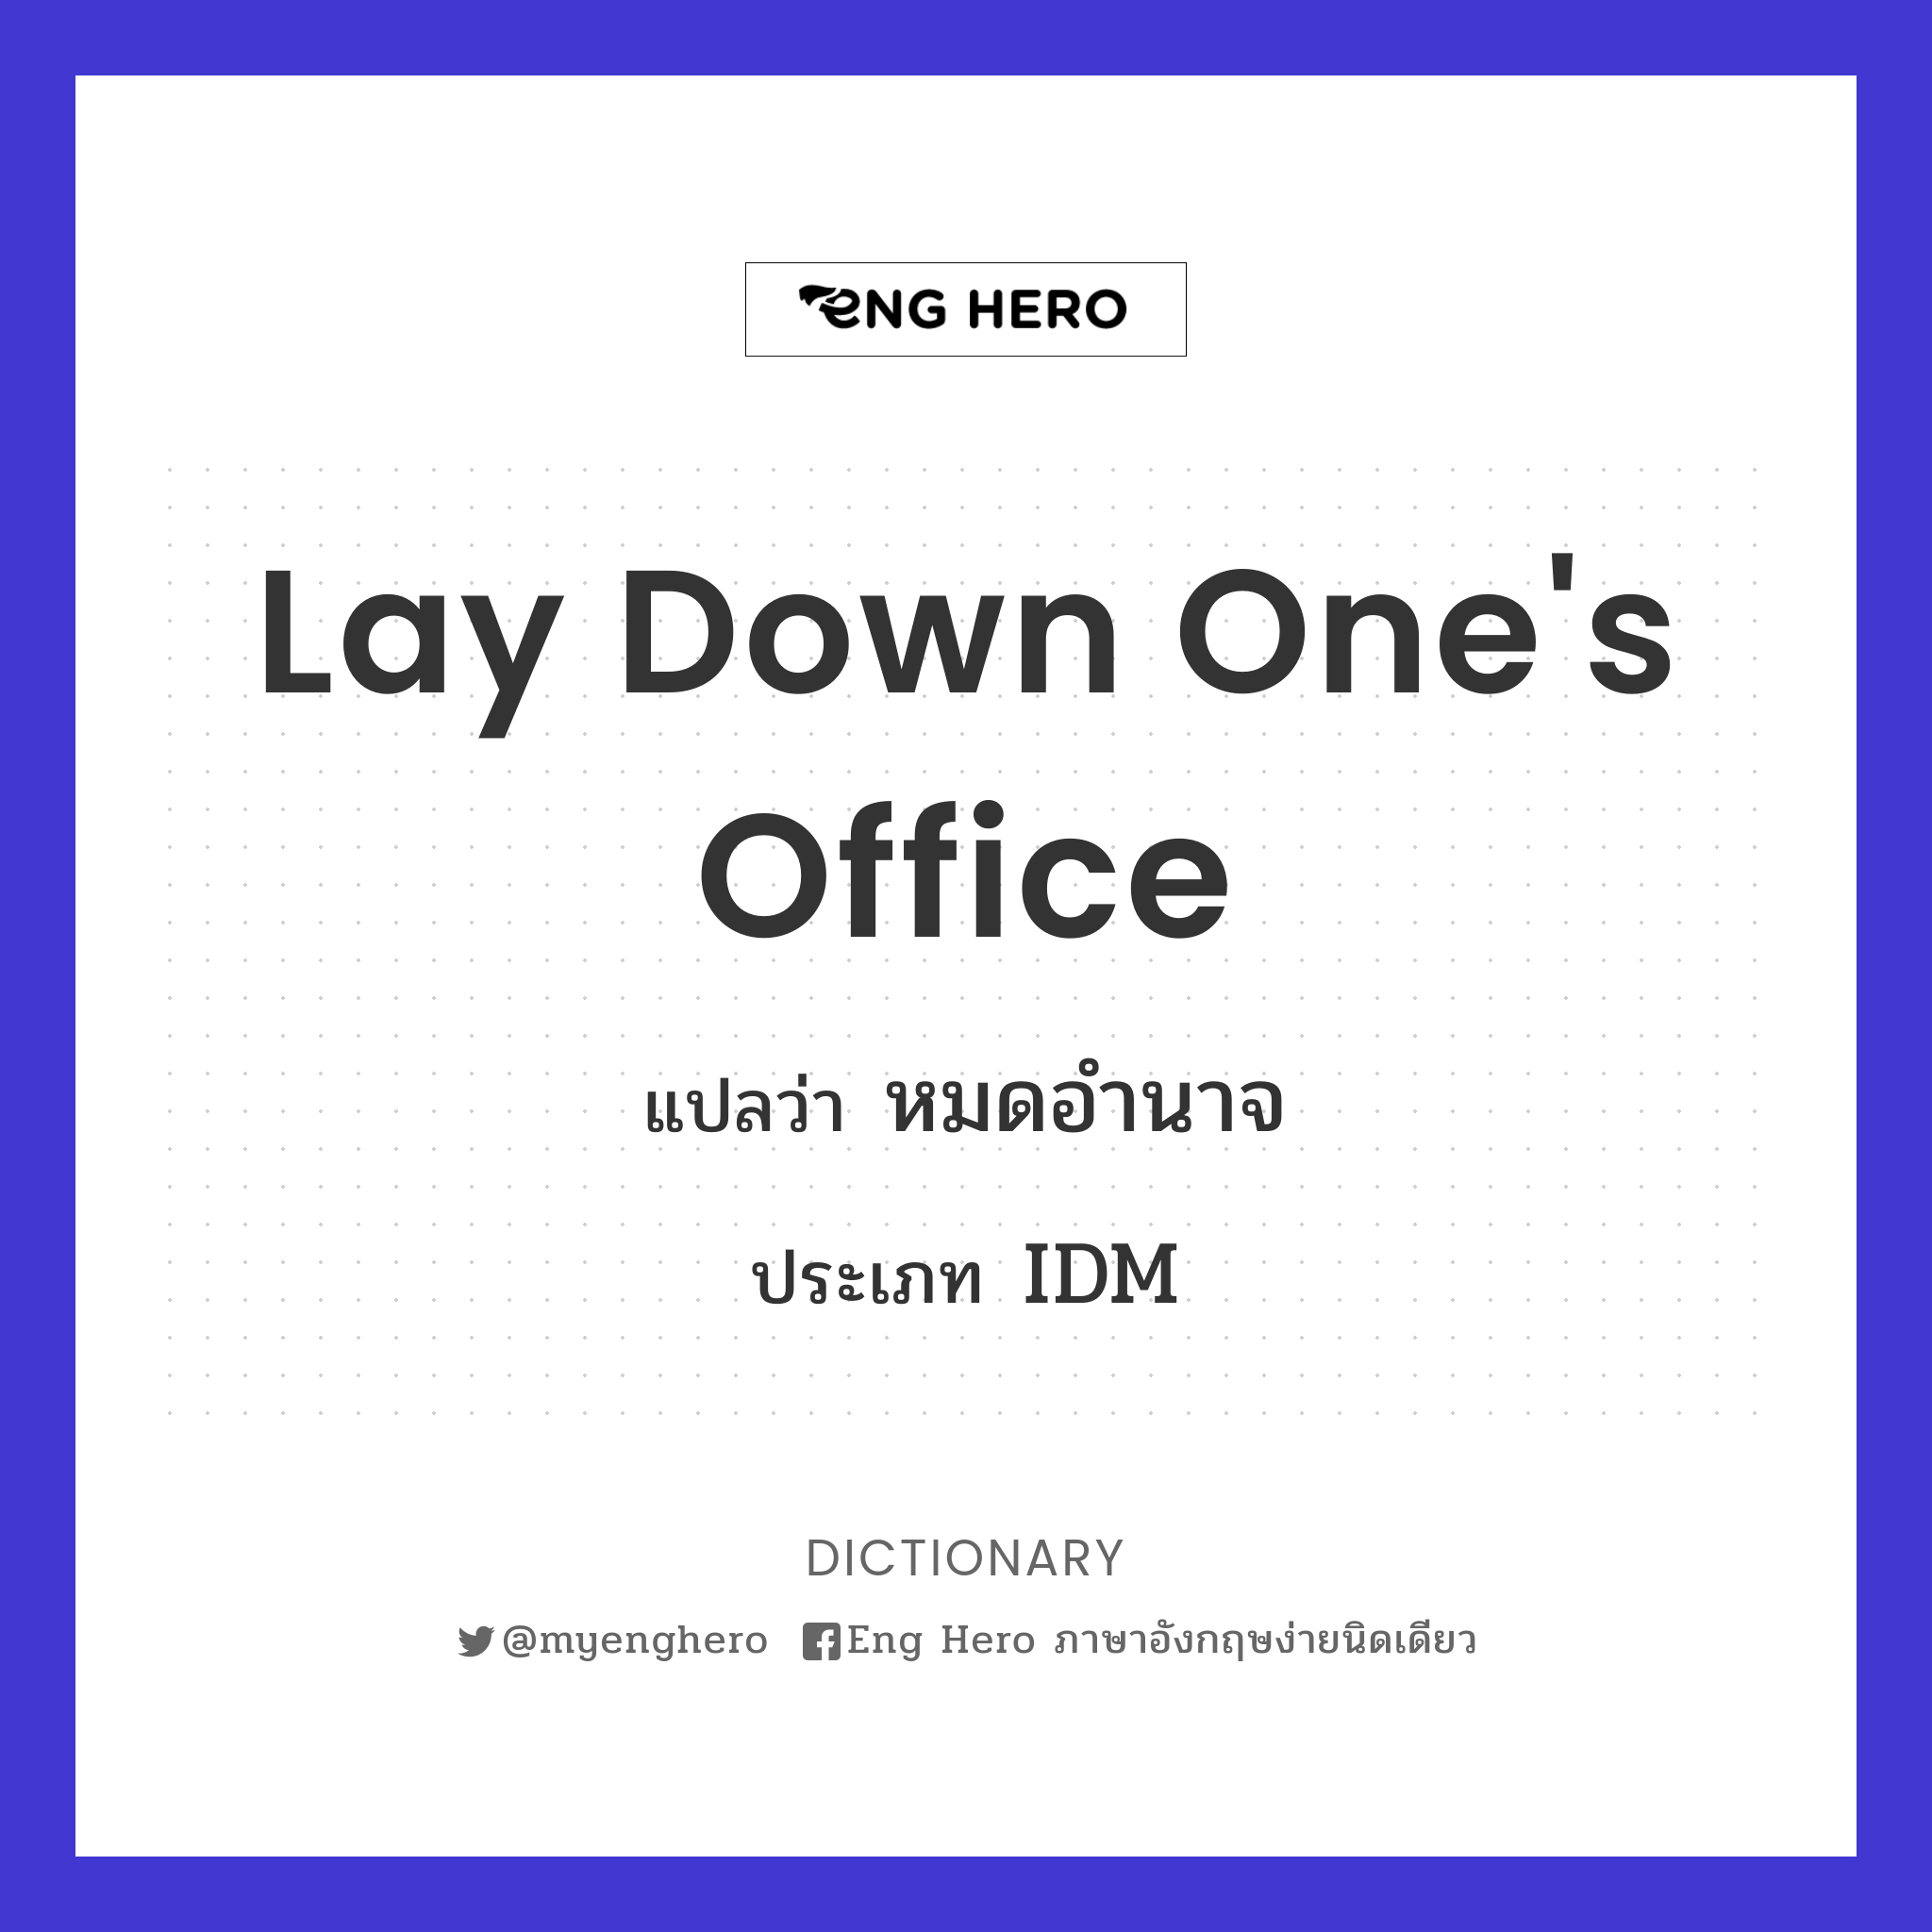 lay down one's office